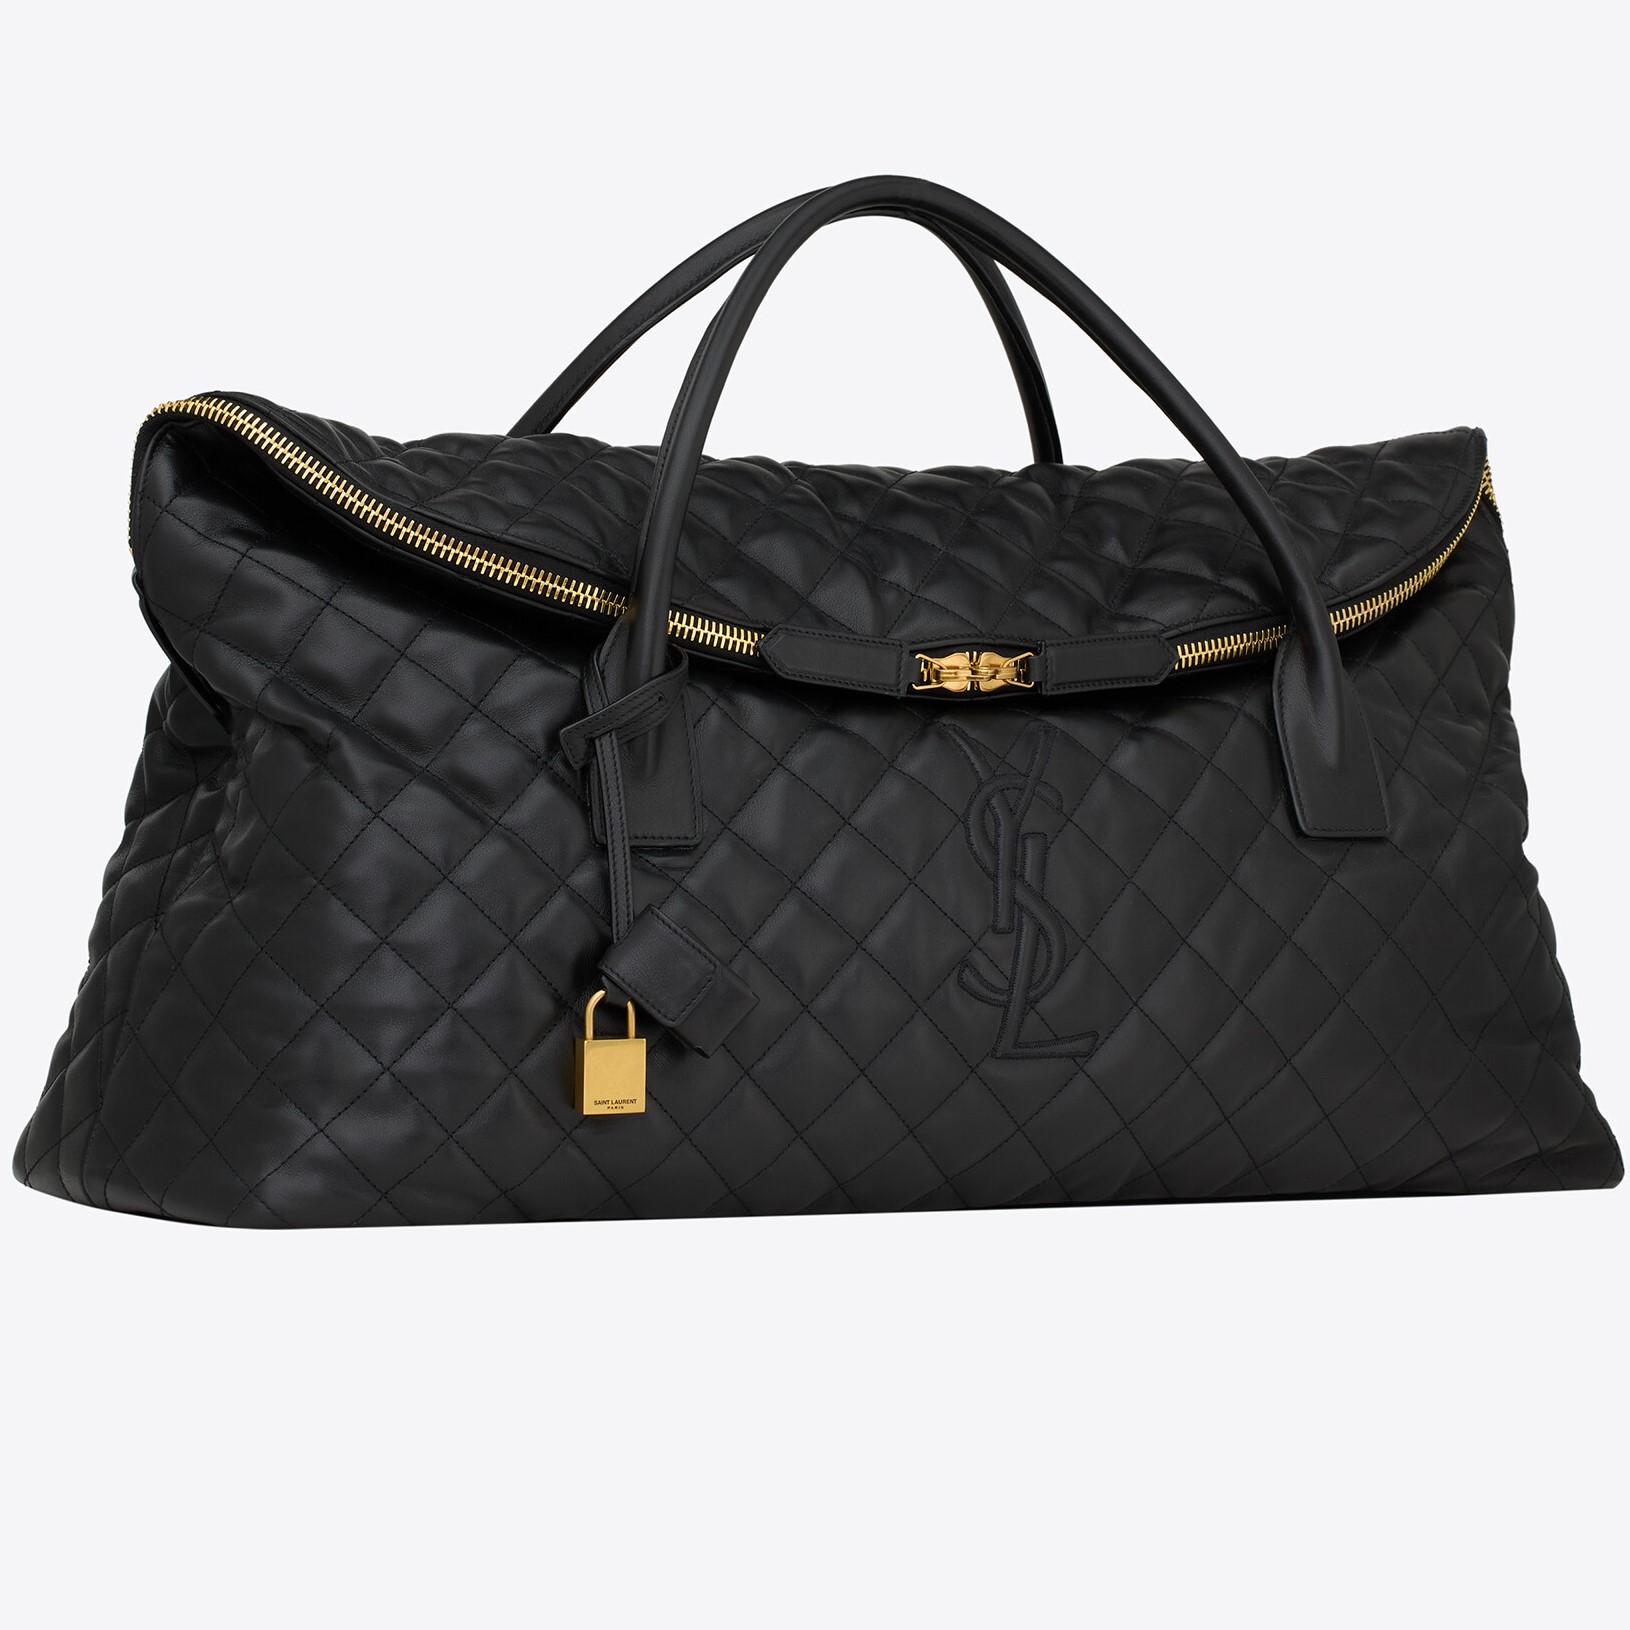 TÚI XÁCH DU LỊCH YSL ES GIANT TRAVEL BAG IN QUILTED LEATHER 4